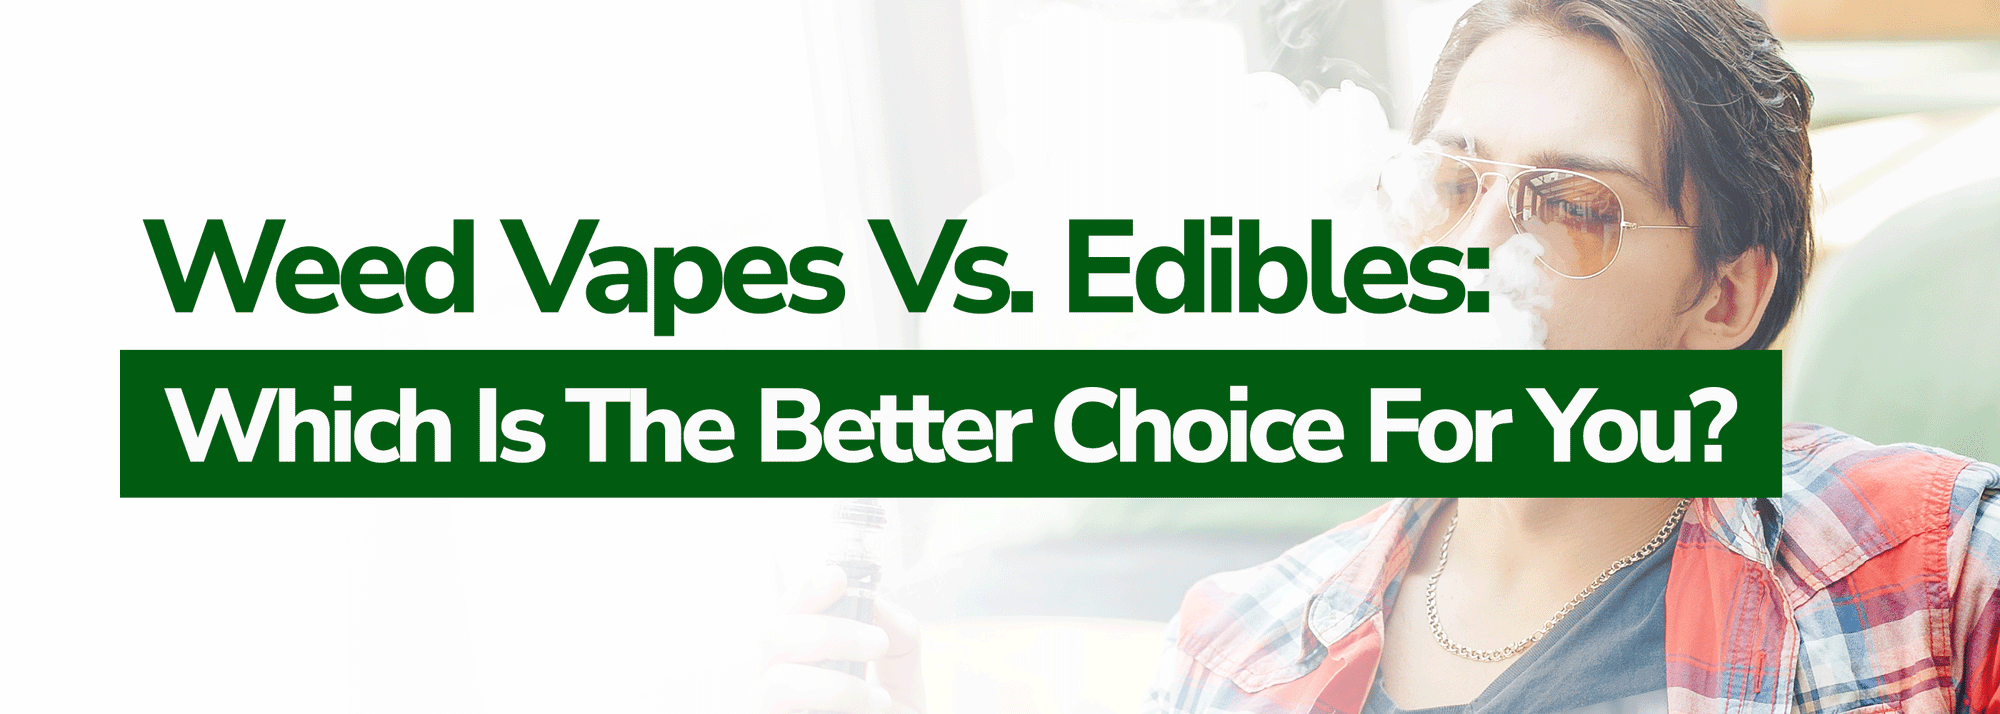 Weed Vapes Vs. Edibles: Which Is The Better Choice For You?